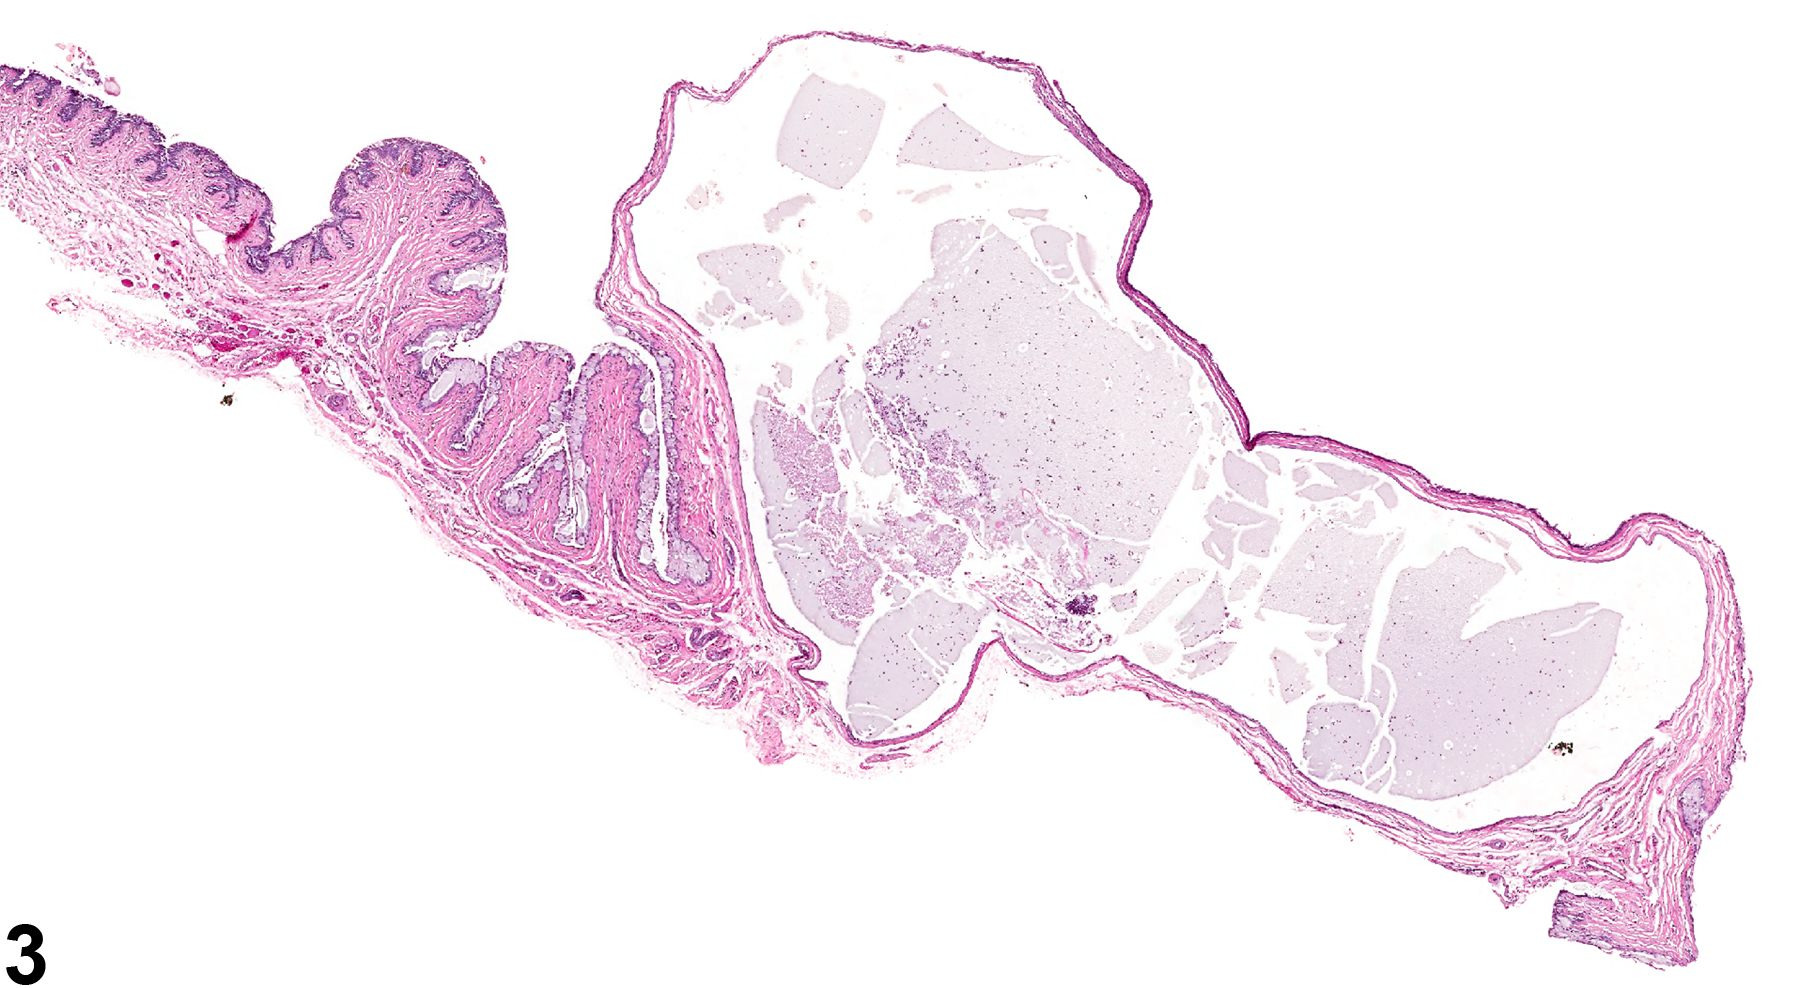 Image of cyst in the vagina from a female F344/N rat in a chronic study